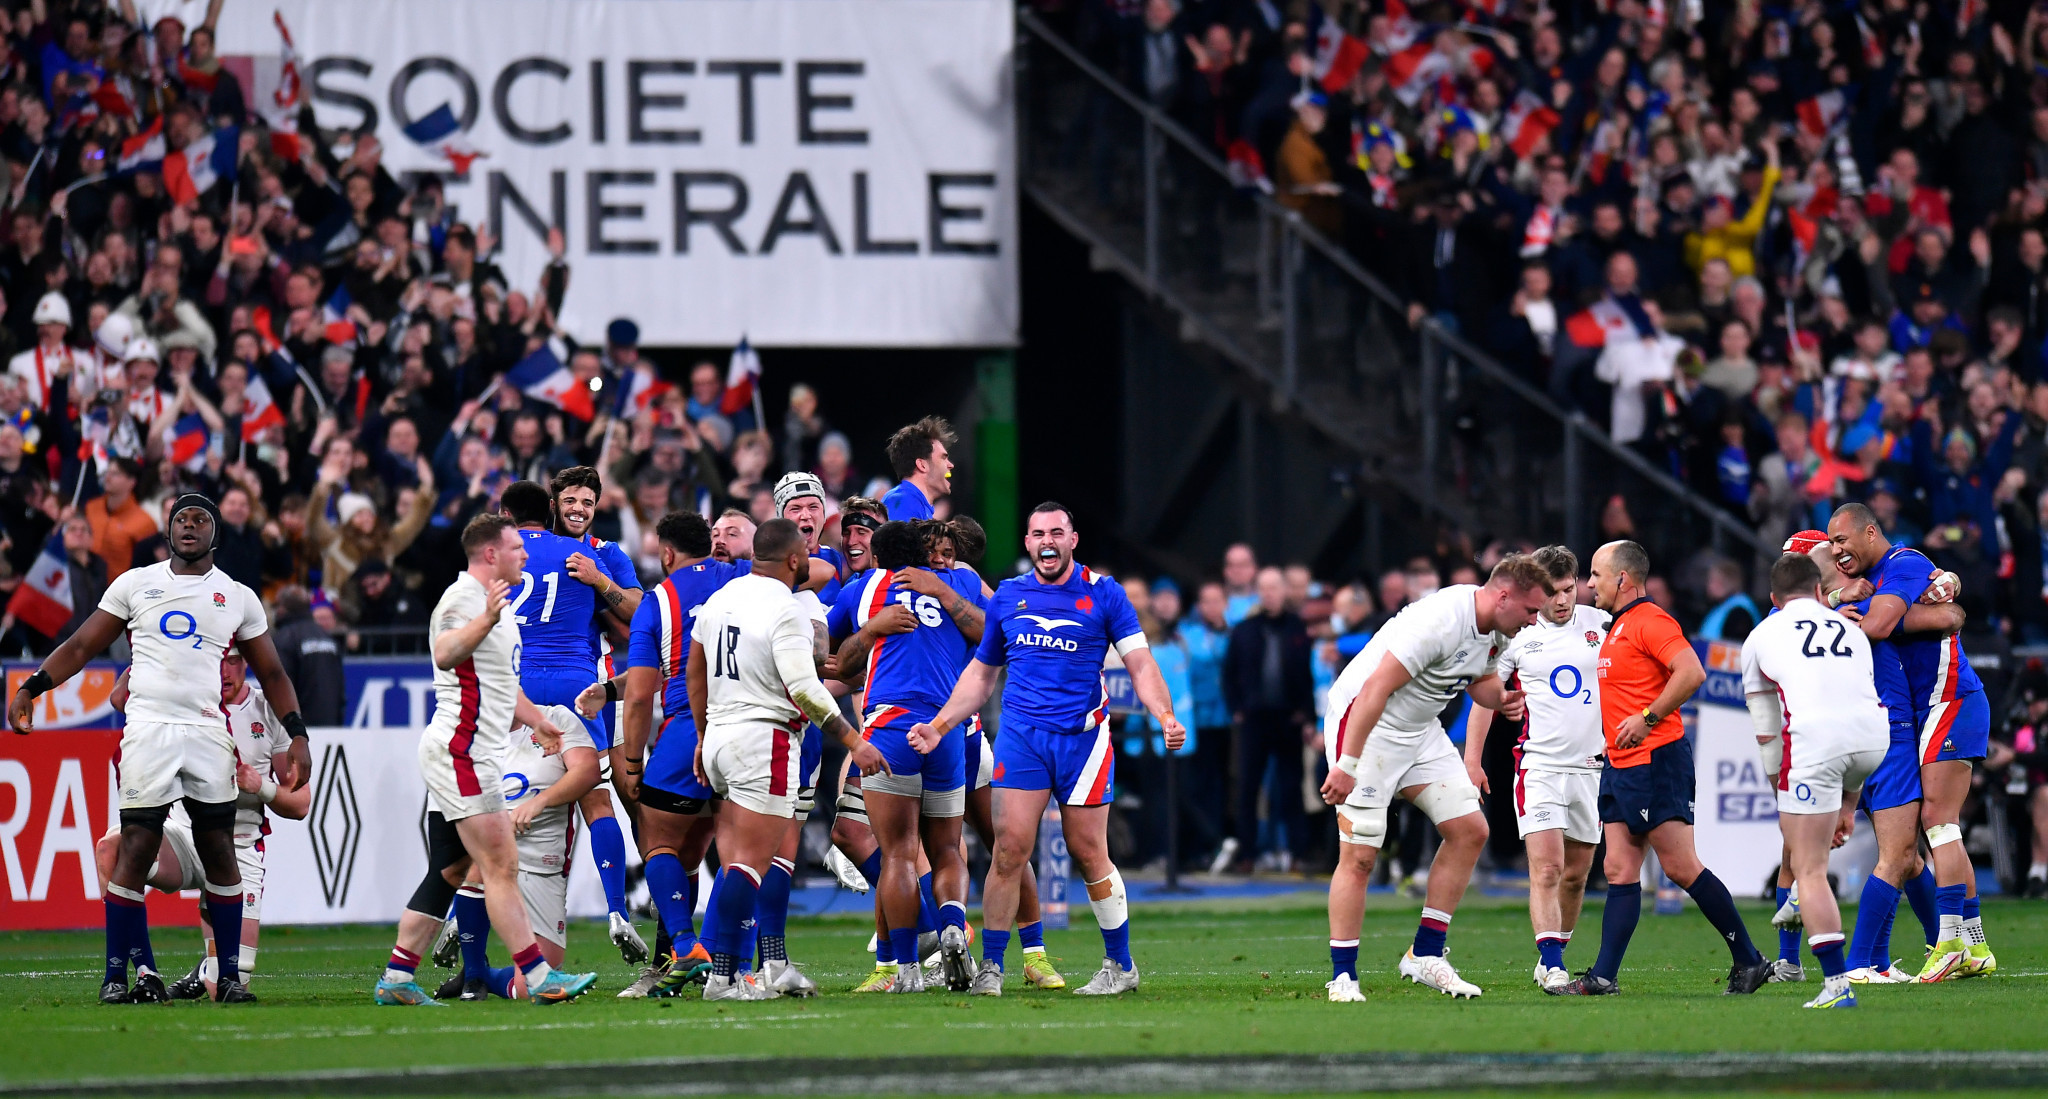 France is due to stage the Rugby World Cup in fewer than 11 months ©Getty Images